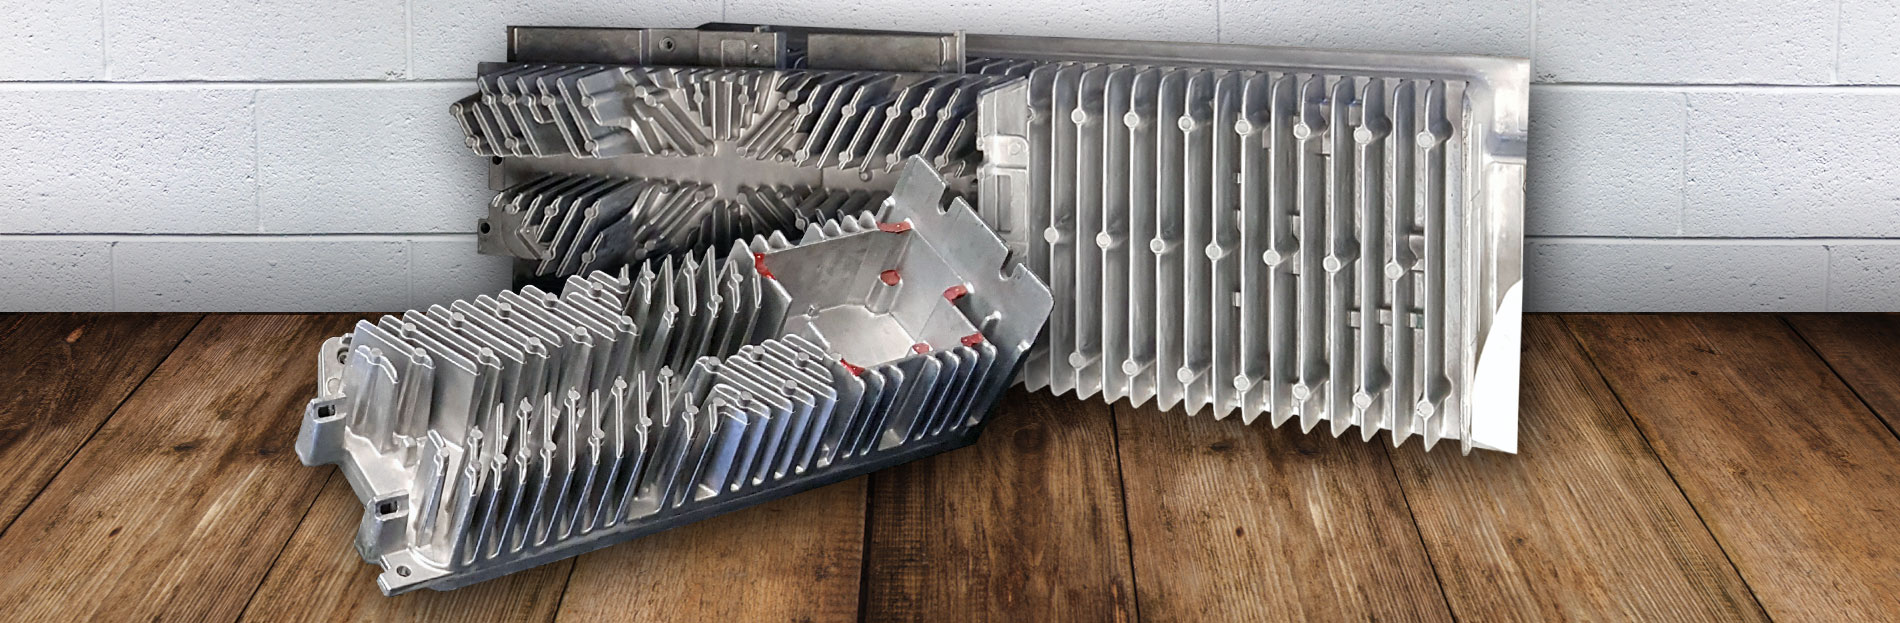 Heat Sinks (Heat Spreaders & Heat Exchangers) for LED Lighting and Electronics